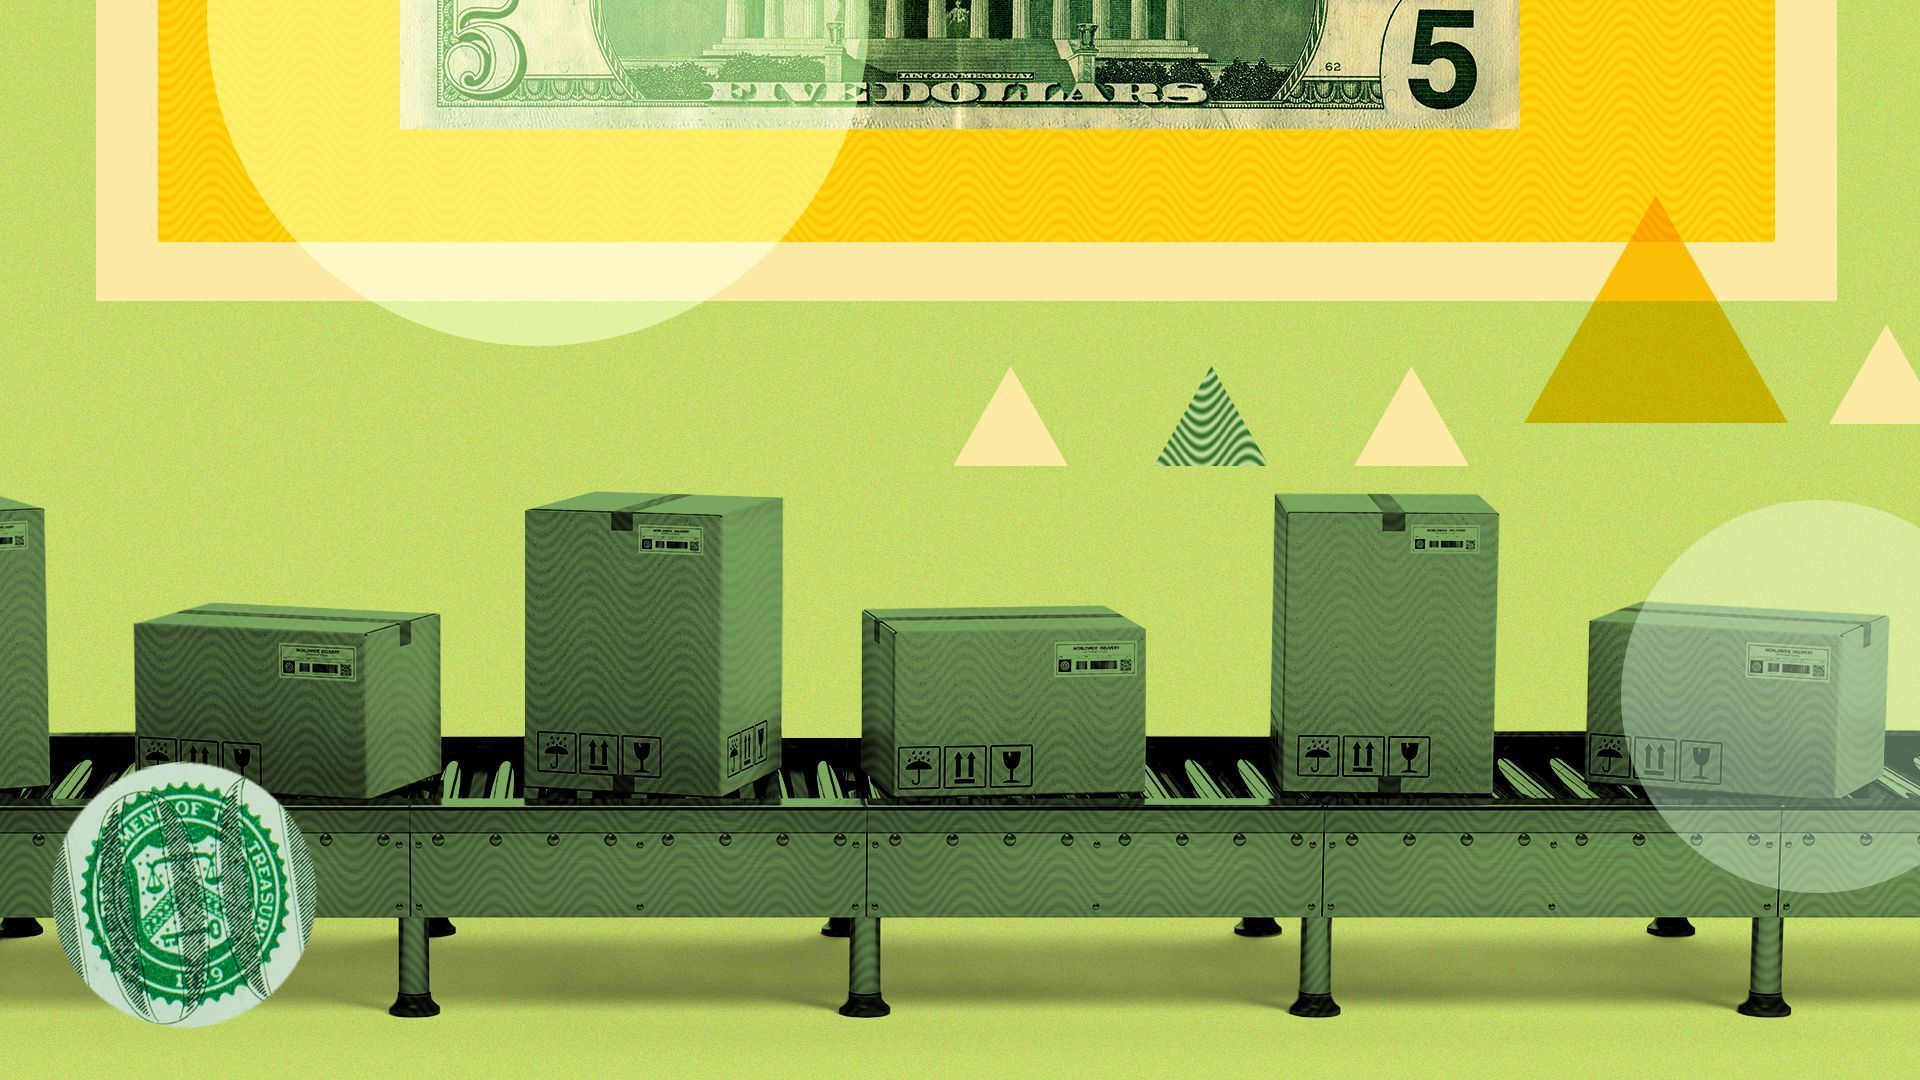 Illustration of packages on a trucking assembly line